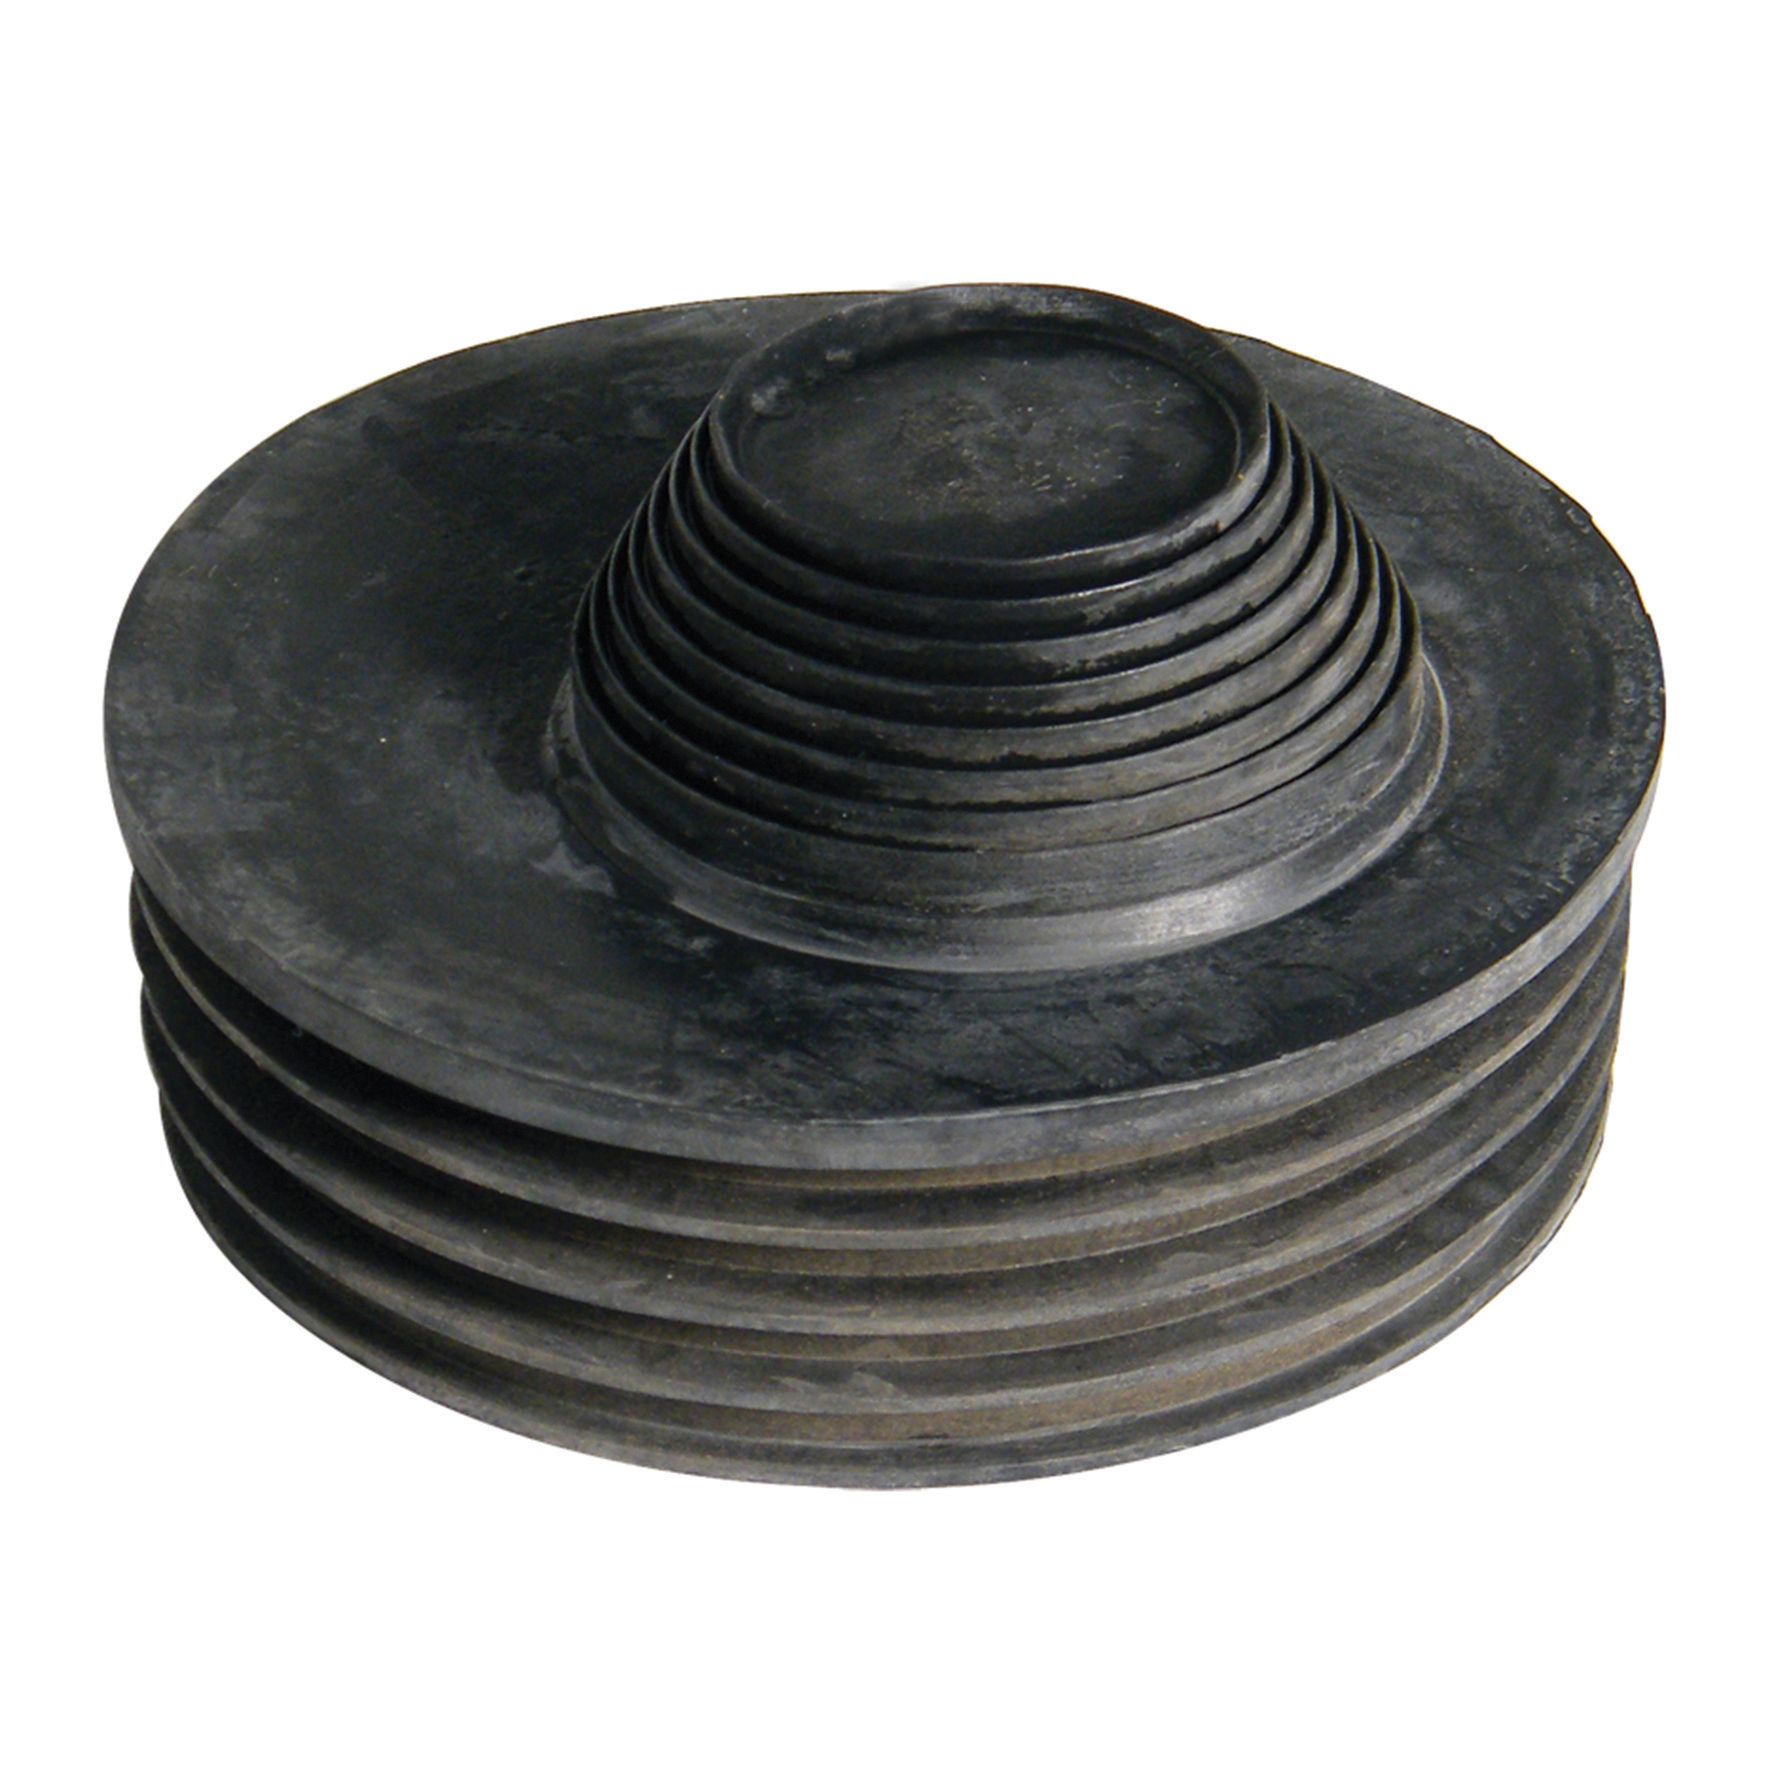 Image of FloPlast Drain Adaptor to Connect 32mm, 40mm and 50mm Waste Pipe - Black